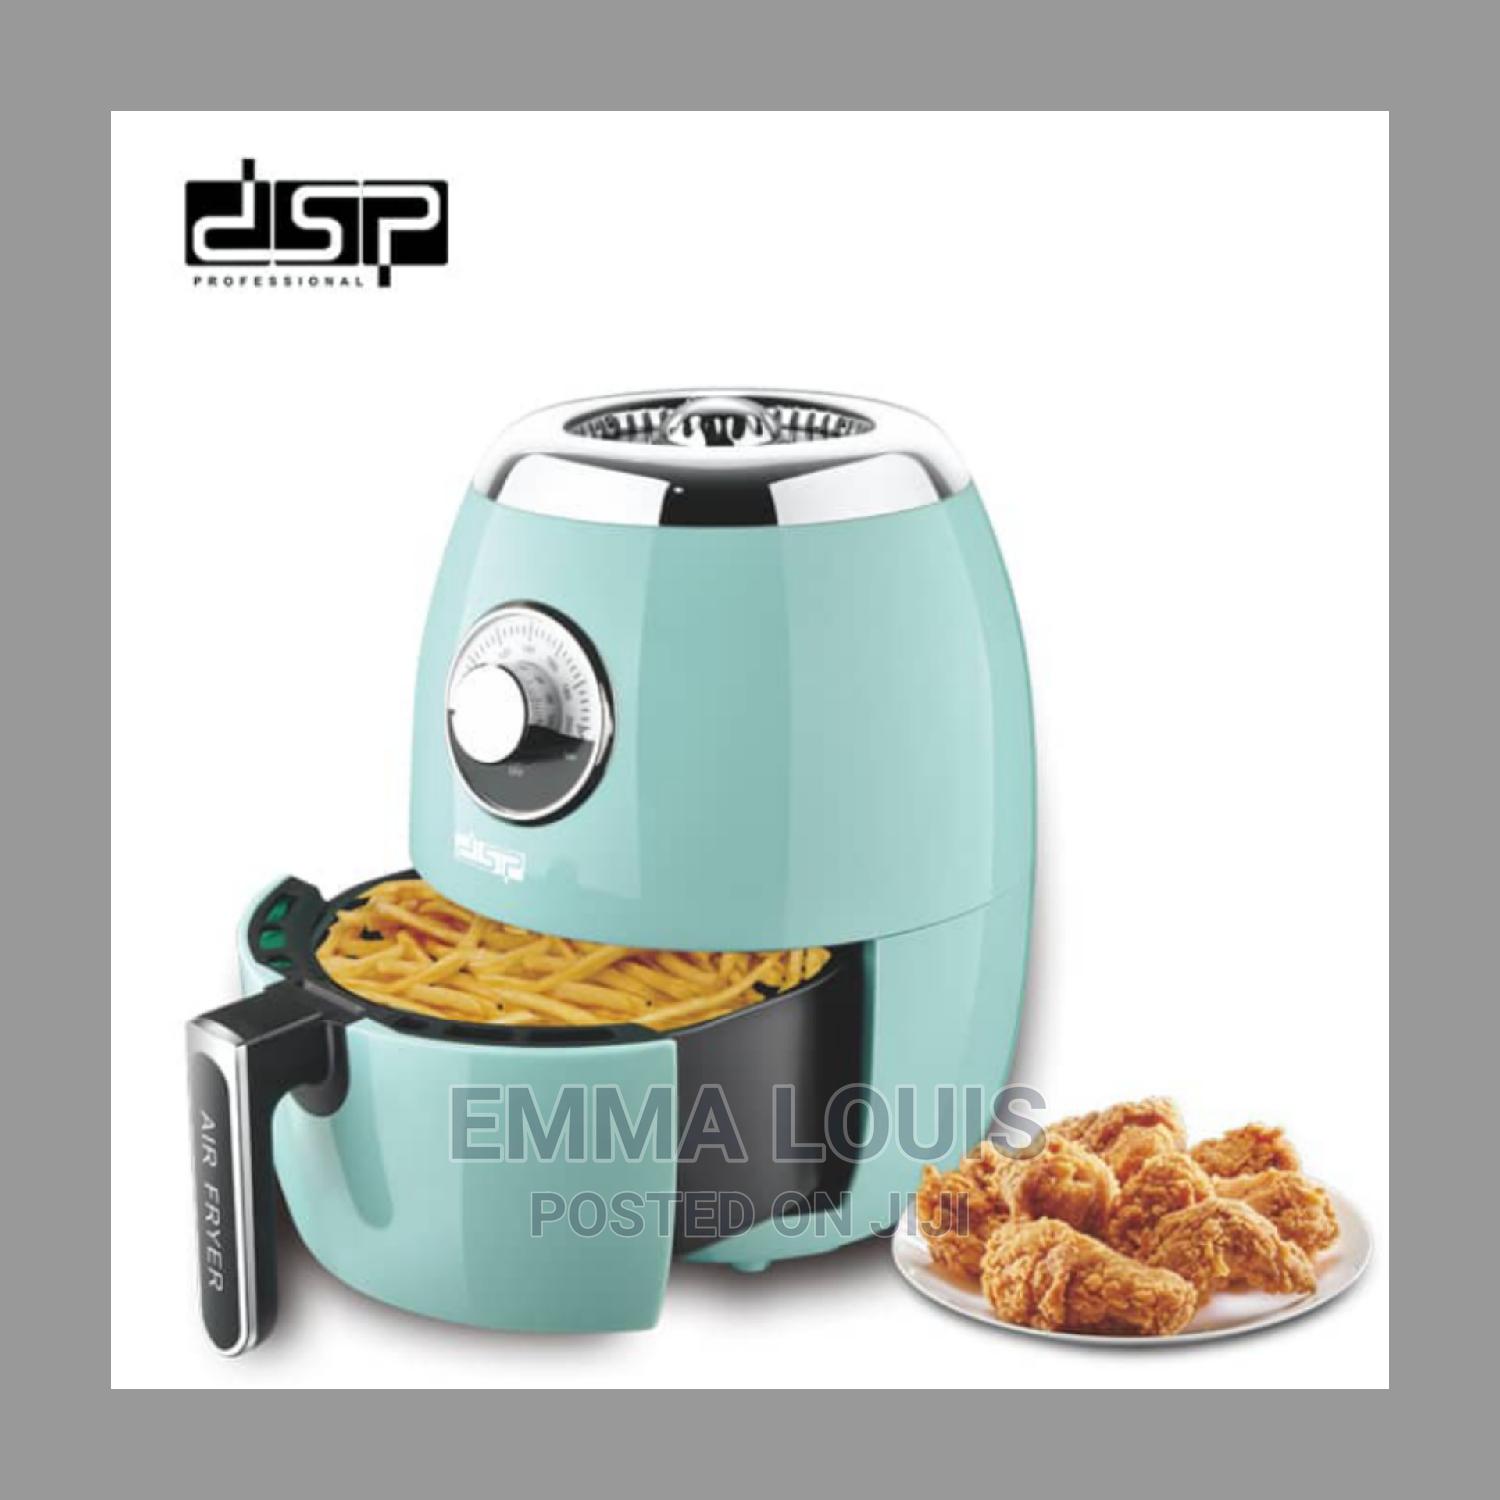 3.0 Liter New Design Electric Deep Air Fryer Without Oil DSP KB2048